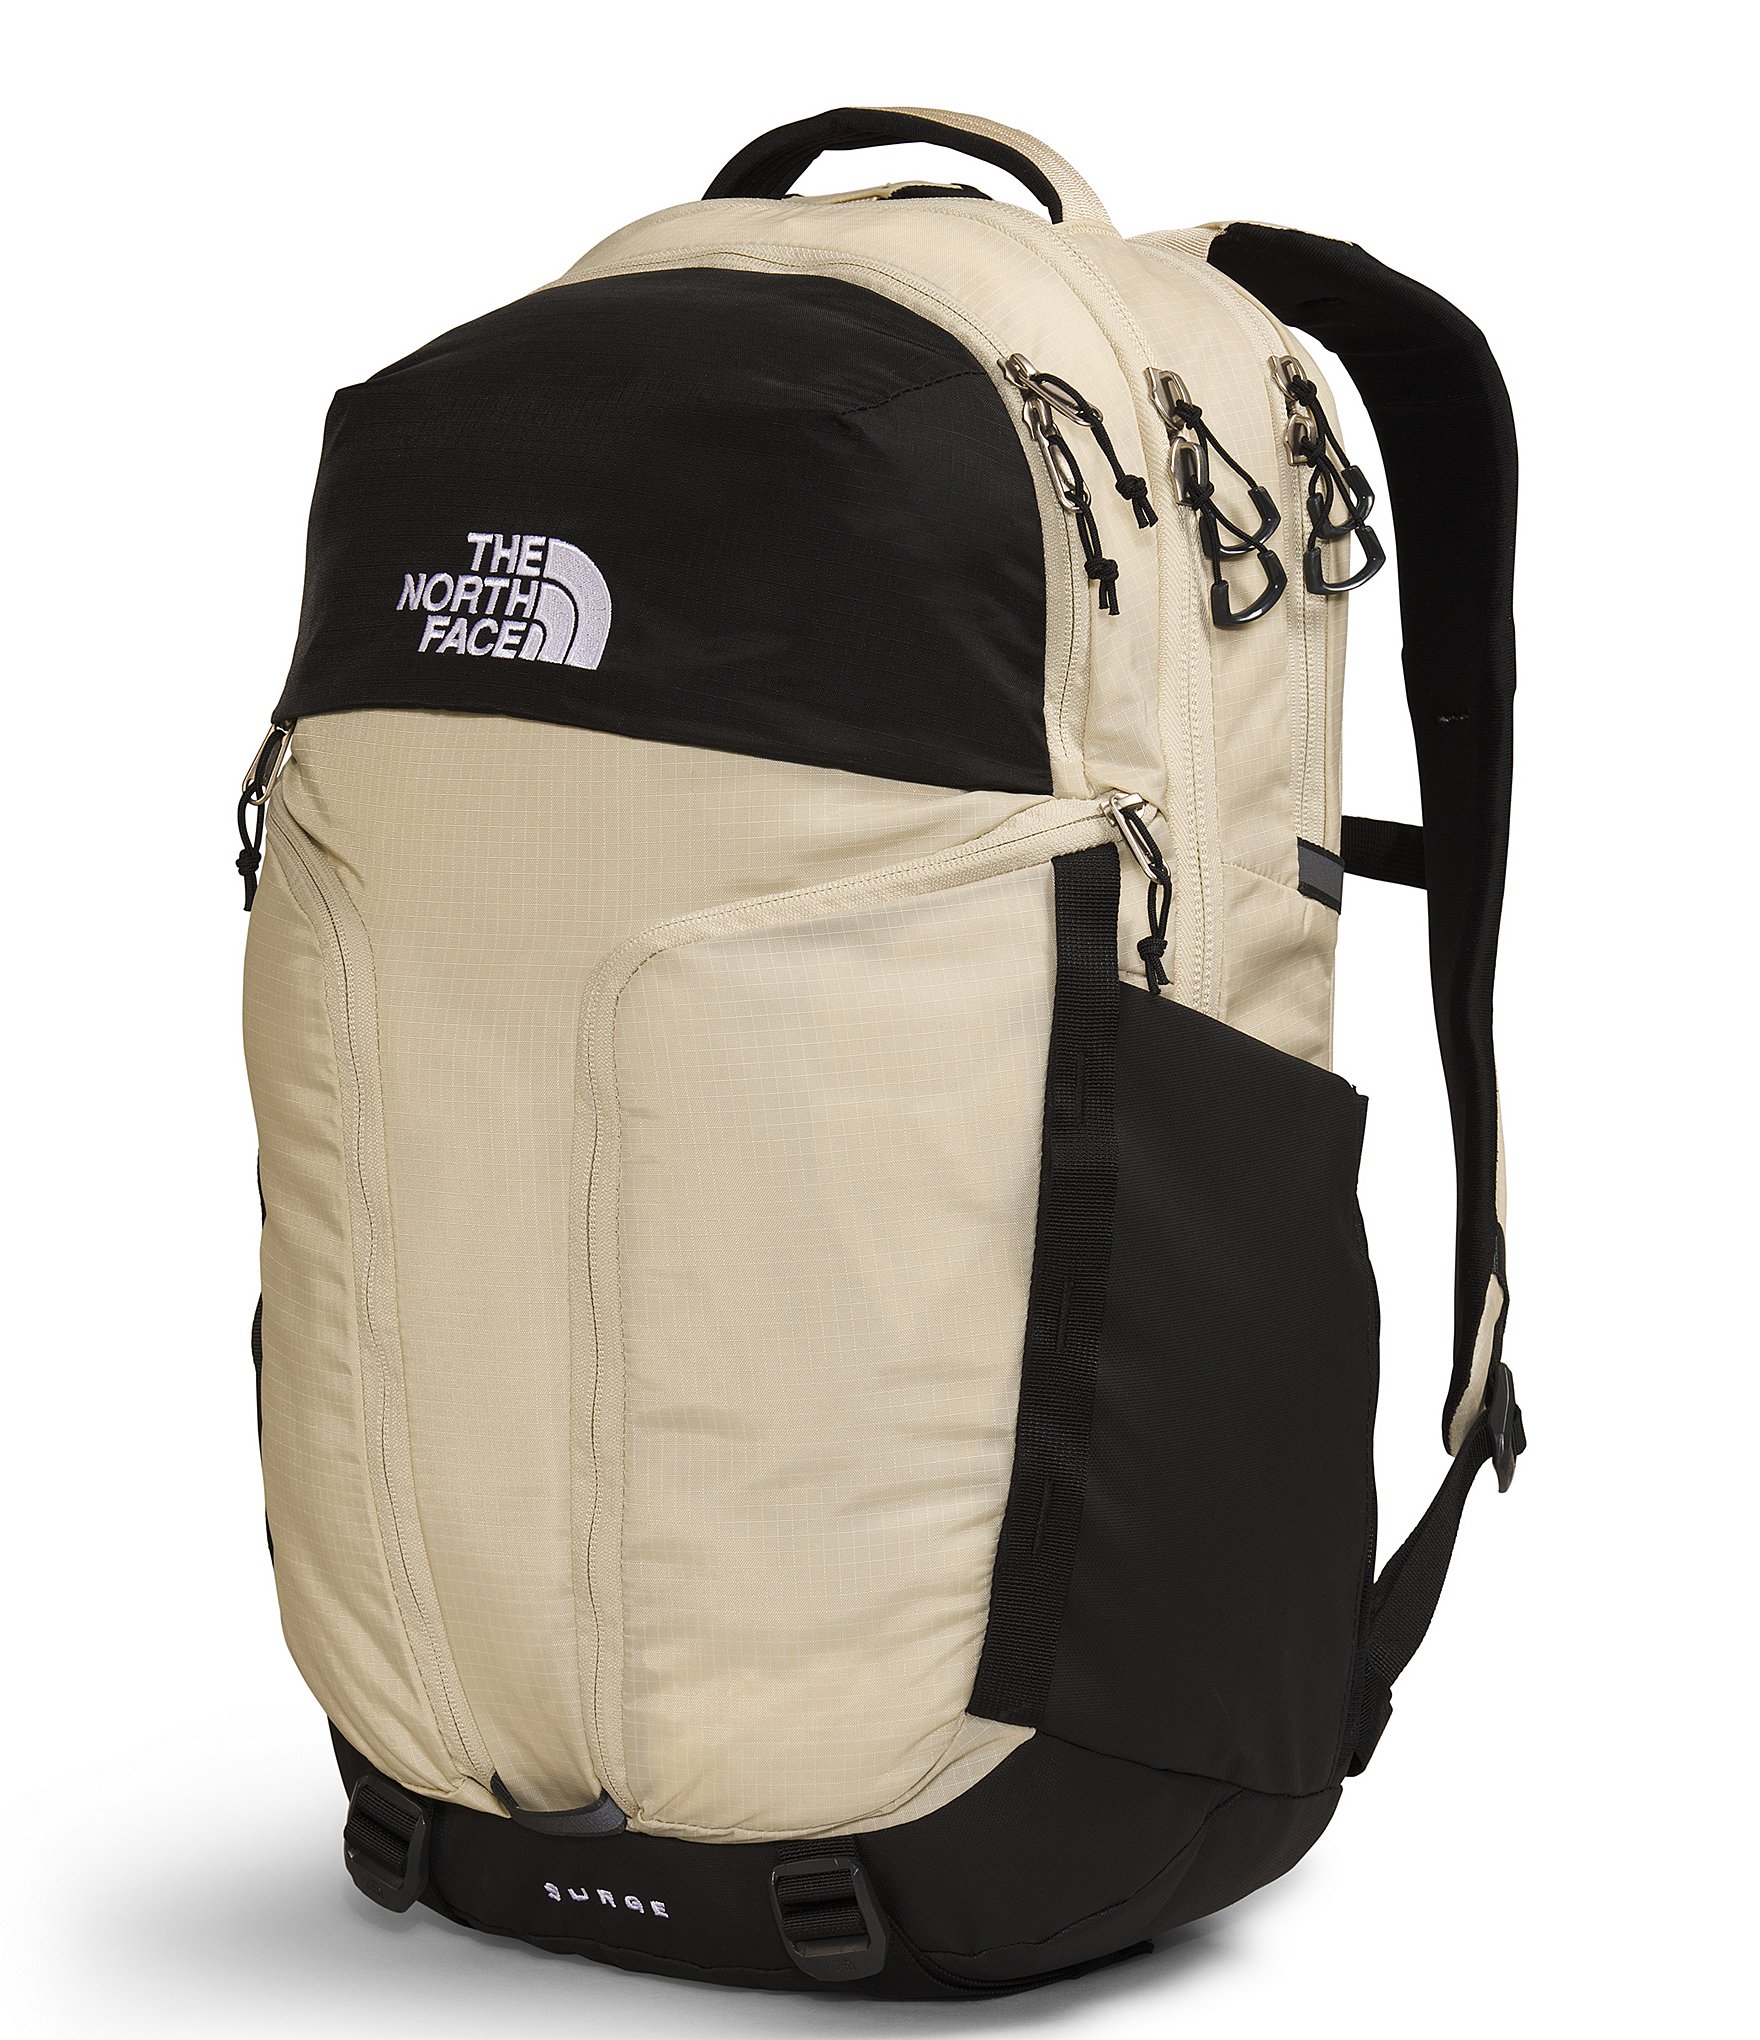 The North Face Surge 28L Backpack | Dillard's